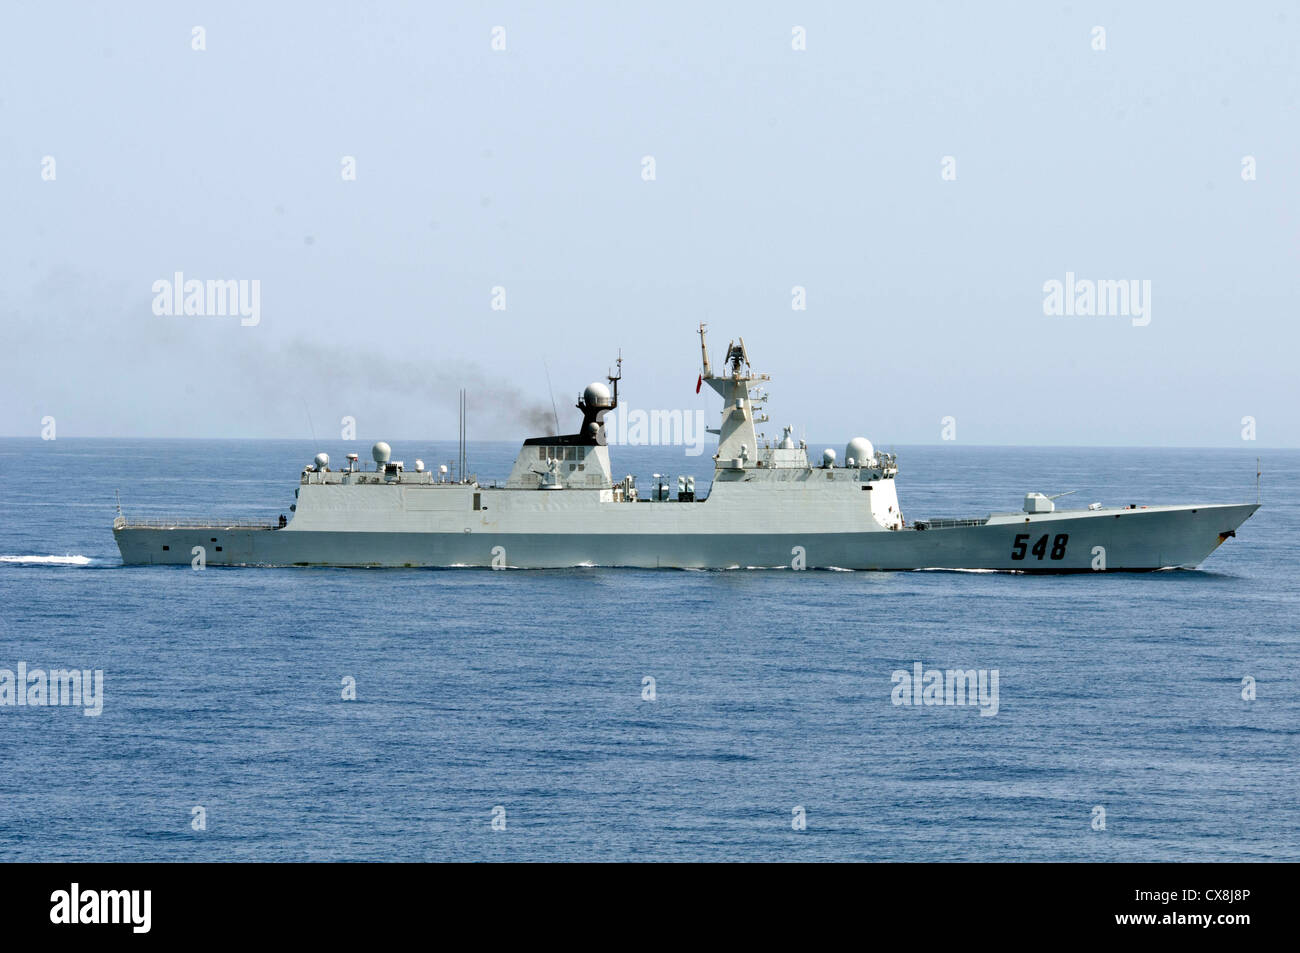 The Chinese People’s Liberation Army (Navy) frigate Yi Yang (FF 548) transits the Gulf of Aden prior to conducting a bilateral counter-piracy exercise Monday, Sept. 17, 2012 with the guided-missile destroyer USS Winston S. Churchill (DDG 81). The focus of the exercise was American and Chinese naval cooperation in detecting, boarding, and searching suspected pirated vessels. Winston S. Churchill is deployed to the U.S. 5th Fleet area of responsibility conducting maritime security operations, theater security cooperation efforts and support missions for Operation Enduring Freedom. Stock Photo